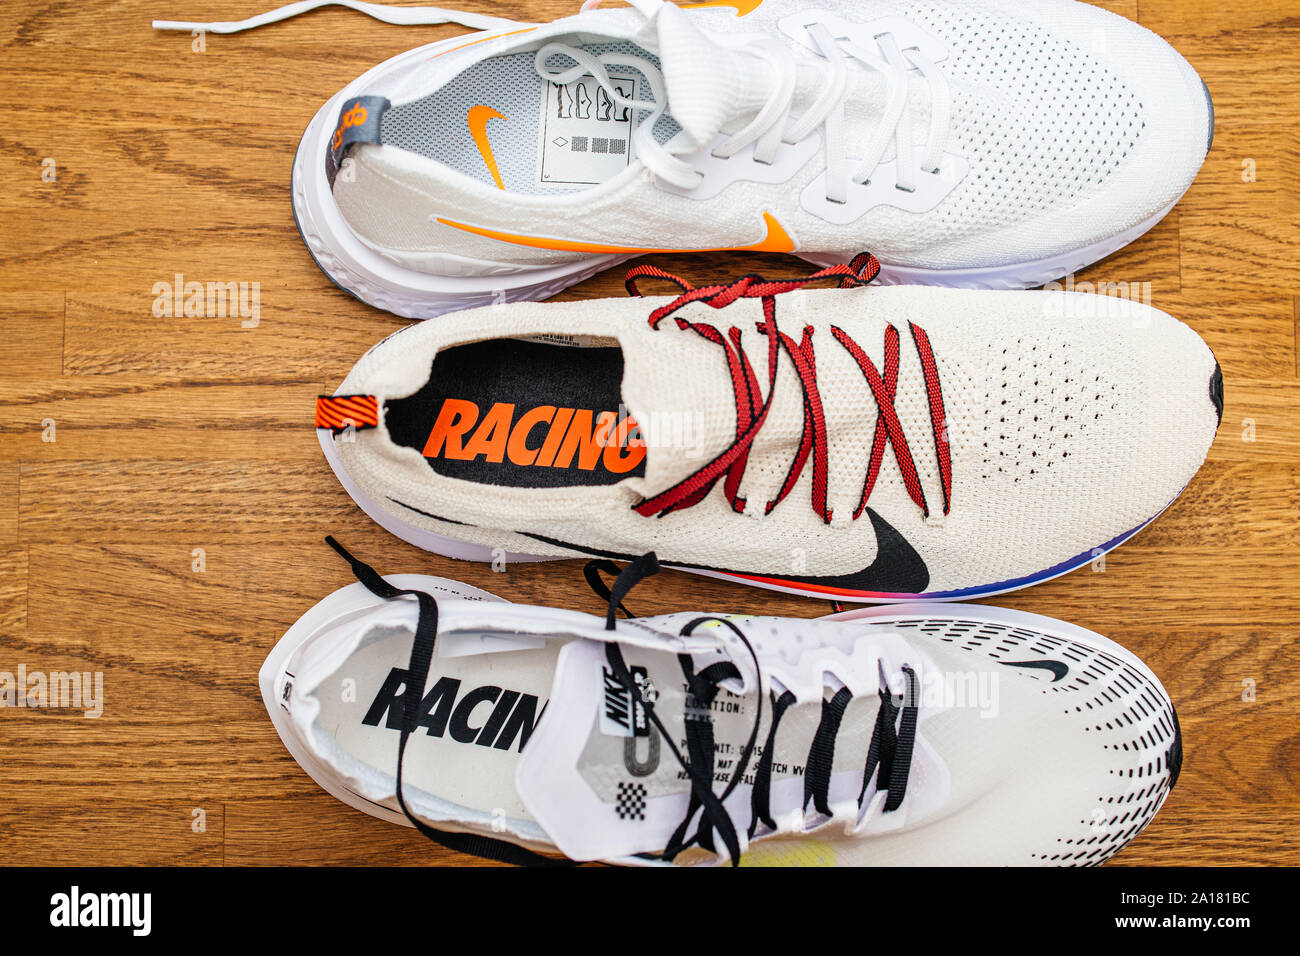 Paris, France - Jul 8, 2019: View from above of three different pair of new  Nike professional